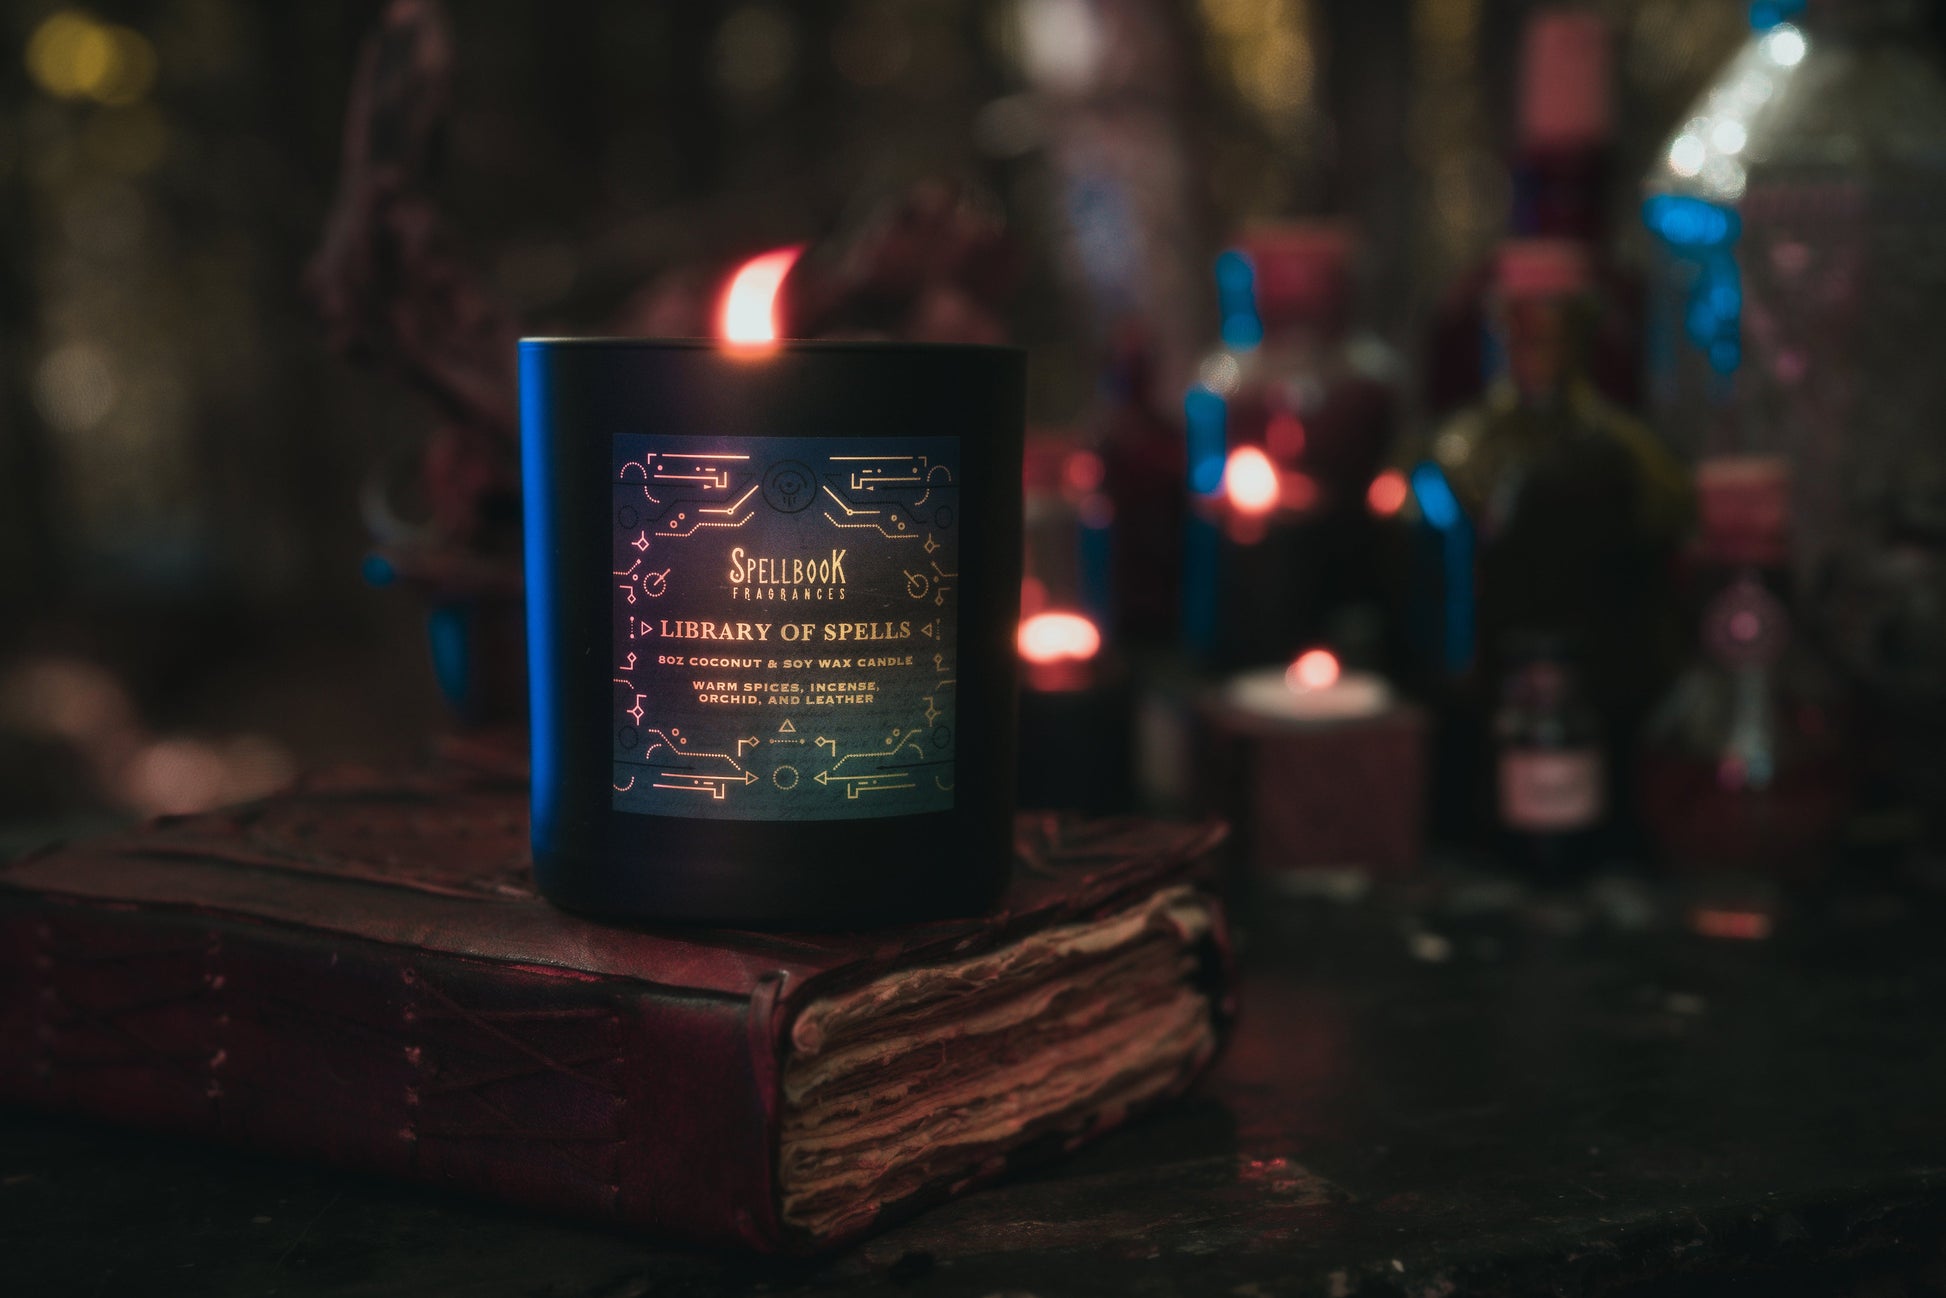 Library of Spells 8 oz Candle - Spellbook Fragrances